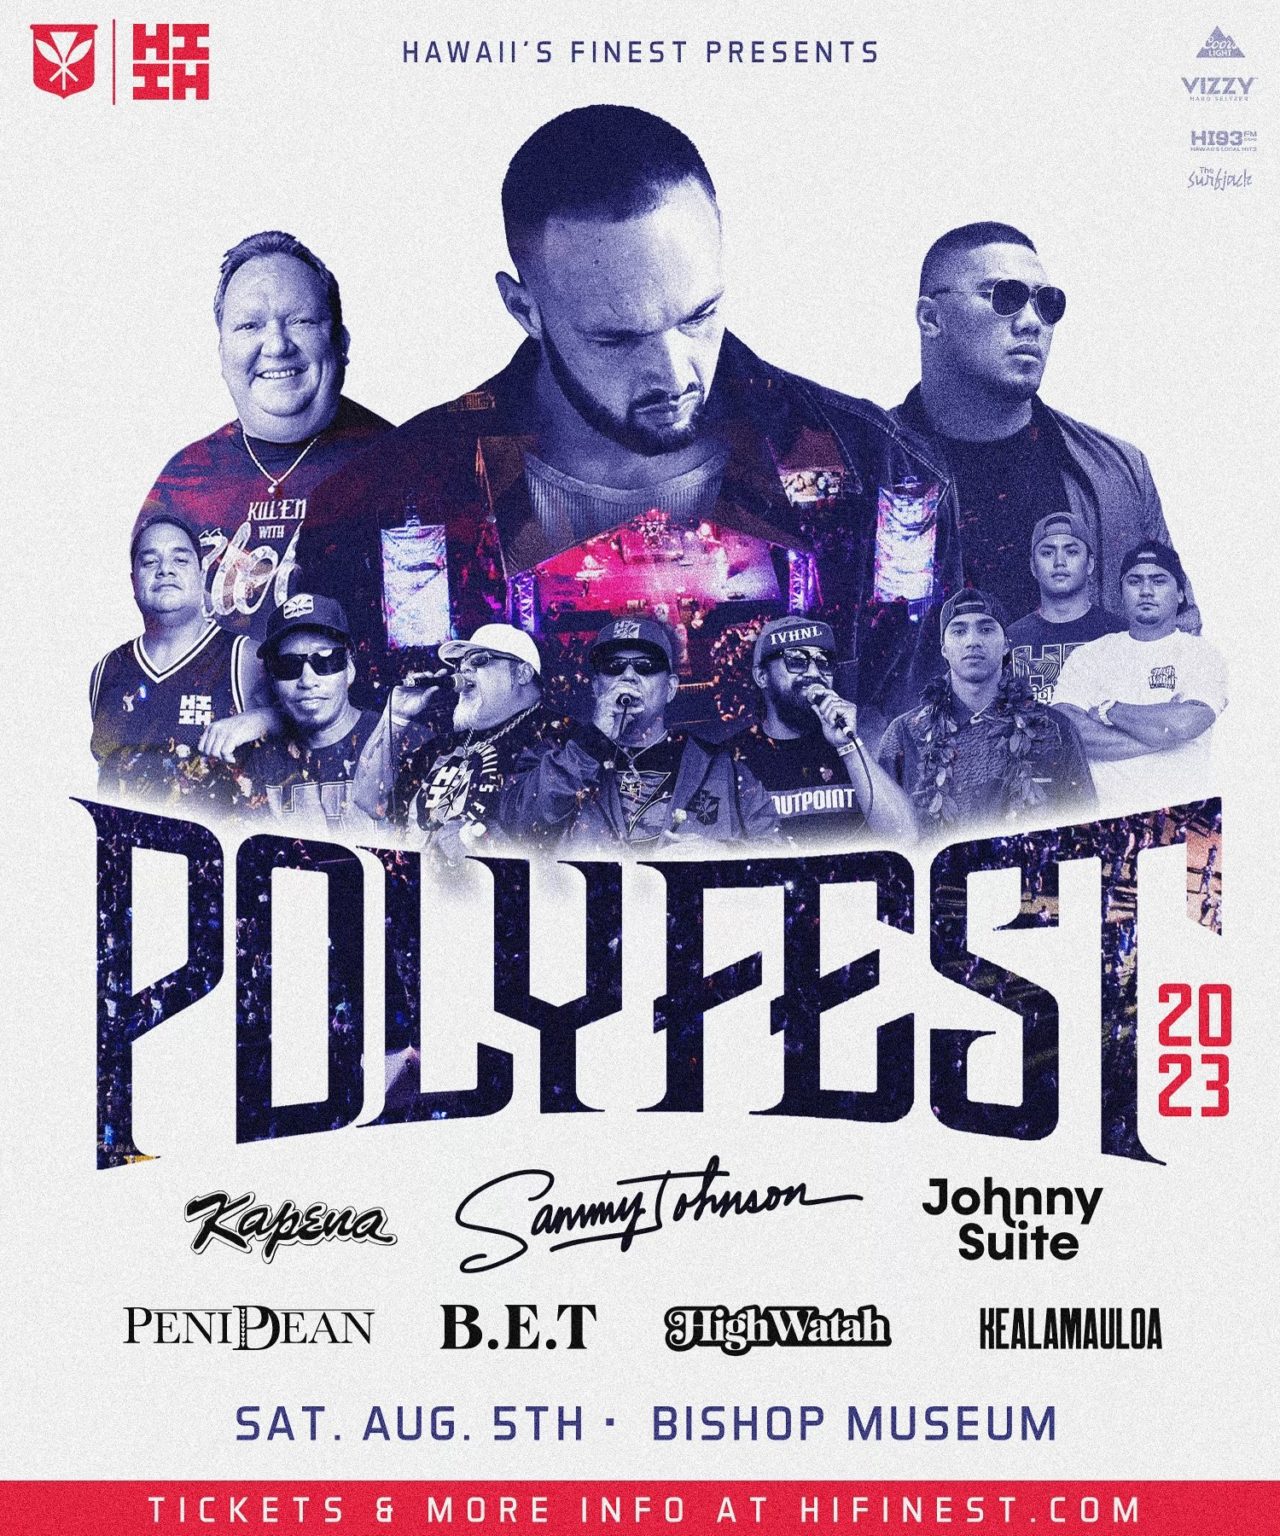 Enter to win tickets to Polyfest 2023! HI93 Hawaii's Local Hits